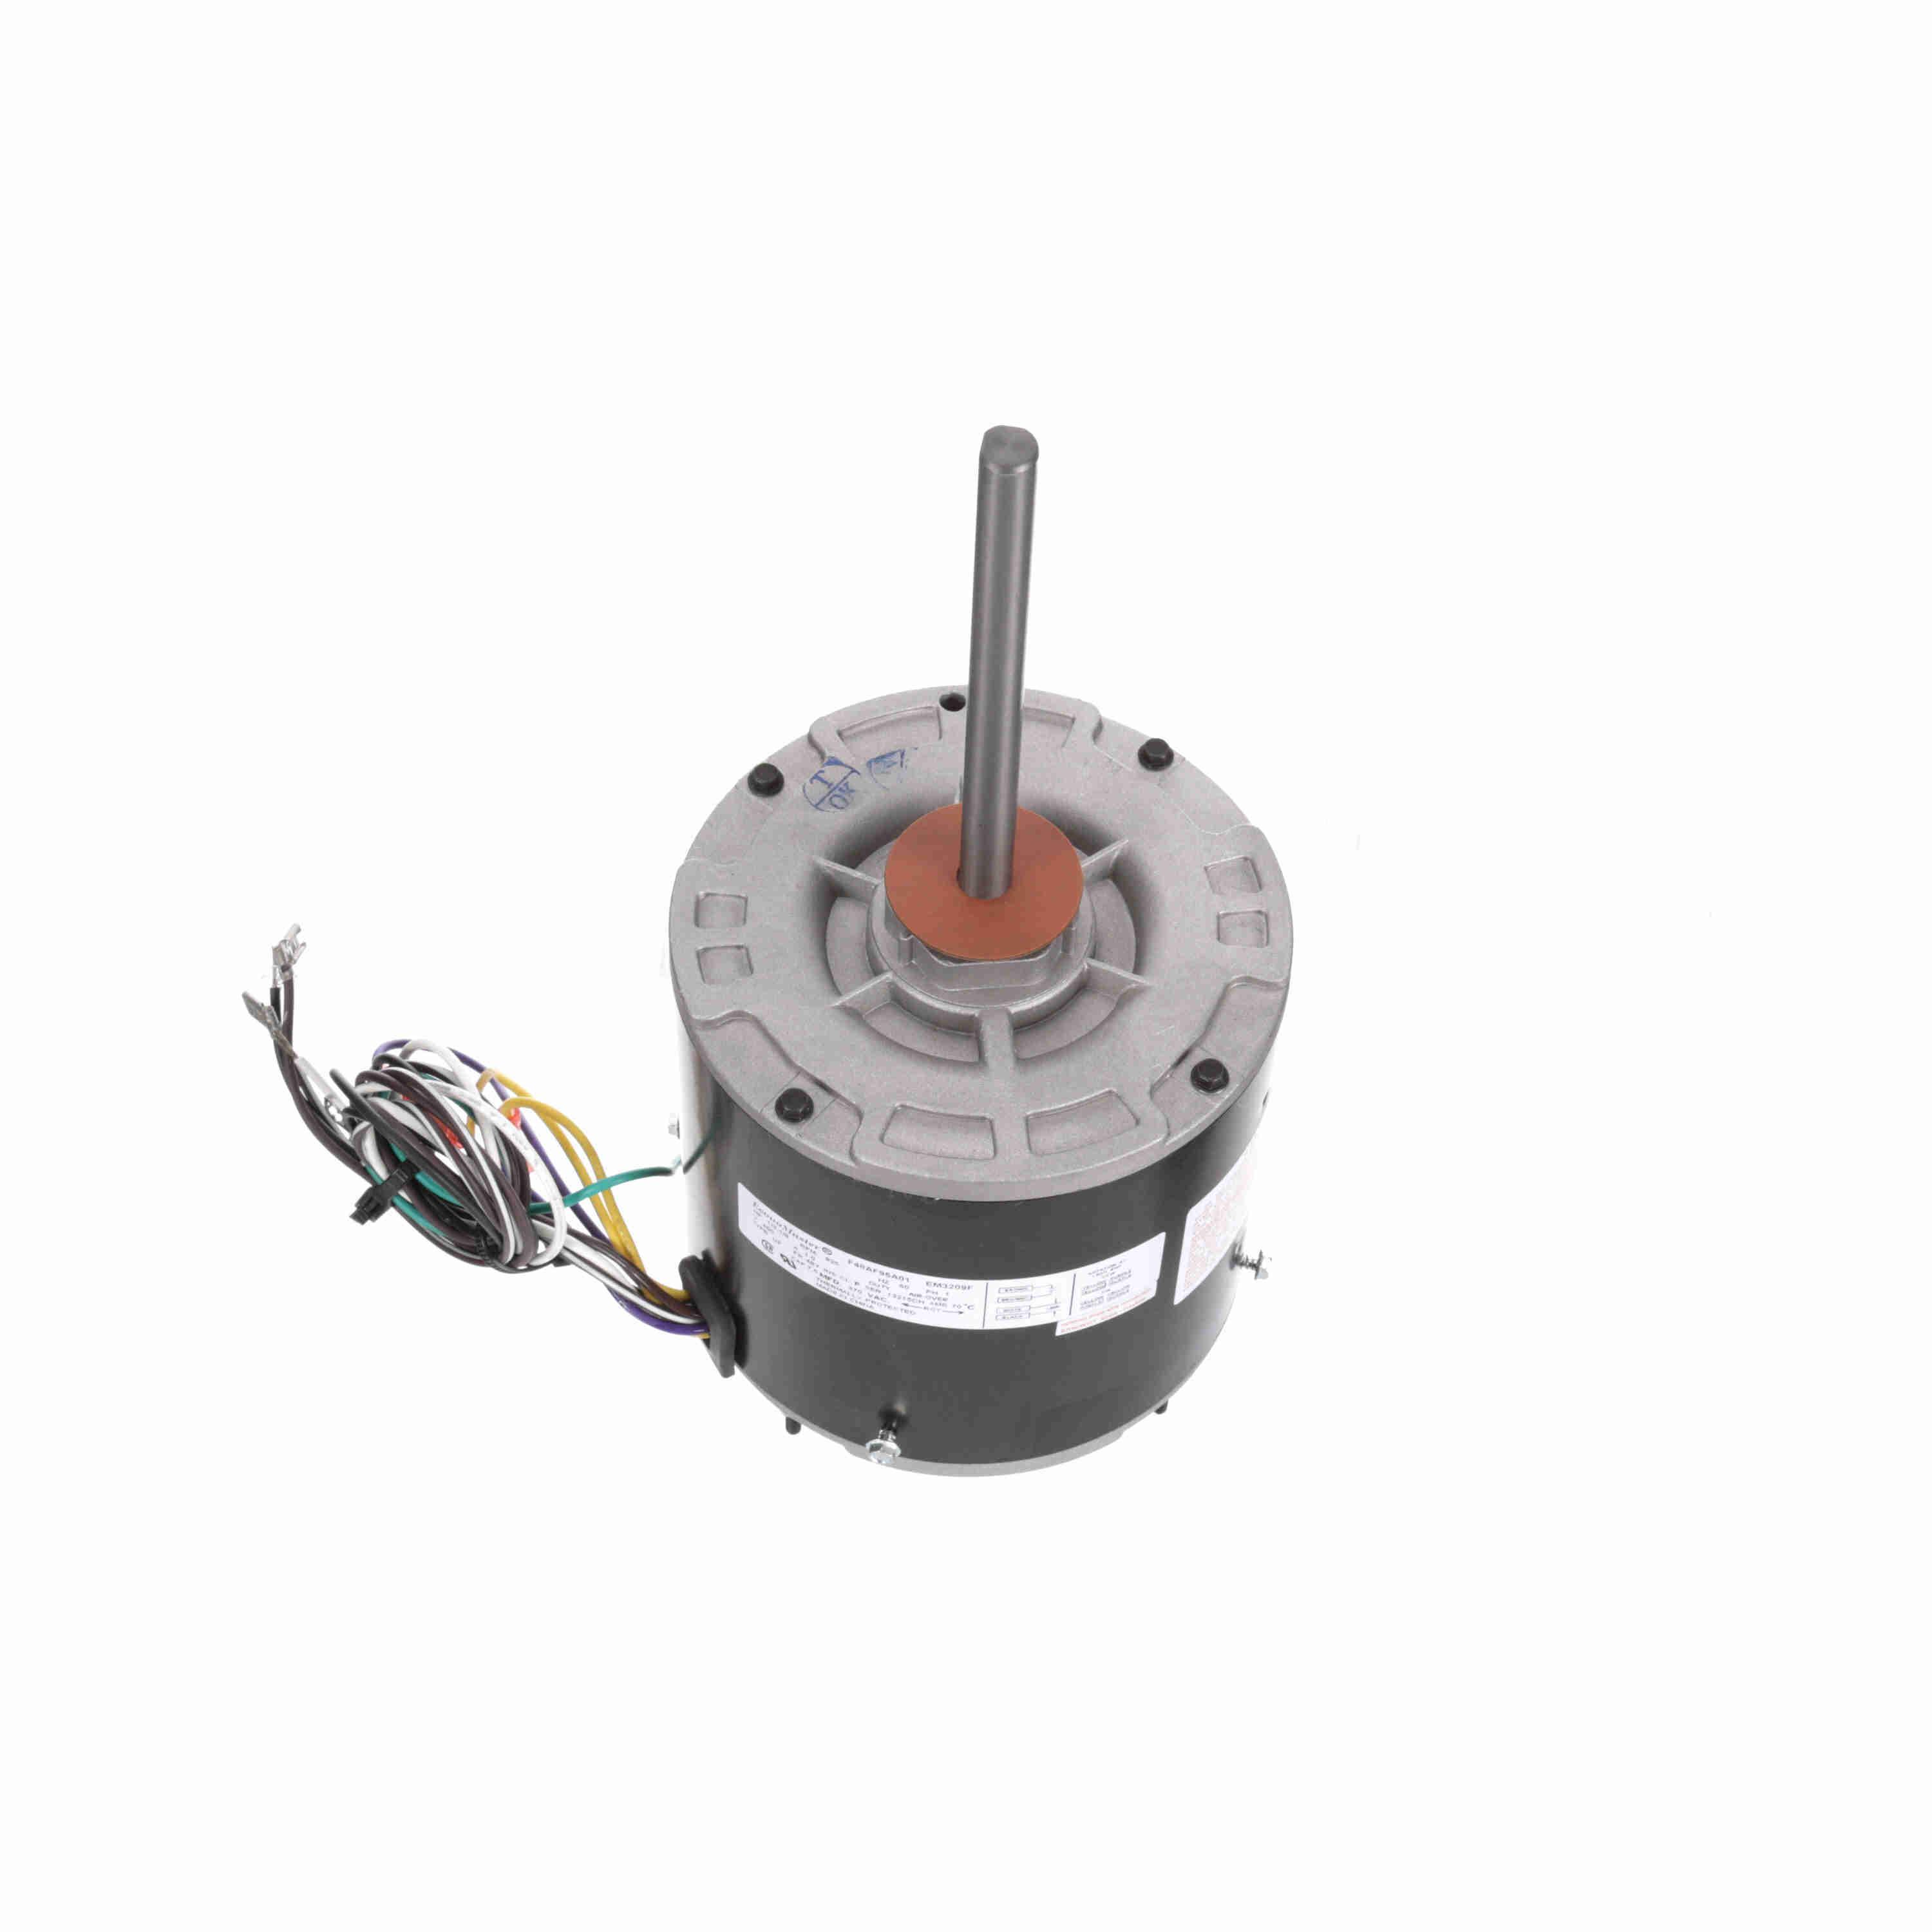 Century® EM3209F 8-Pole HVAC/R Motor, Totally Enclosed Air Over Enclosure, 1/3 to 1/8 hp, 460 V, 60 Hz, 1 Phase, 48Y Frame, 825 rpm Speed, Extended Stud Mount